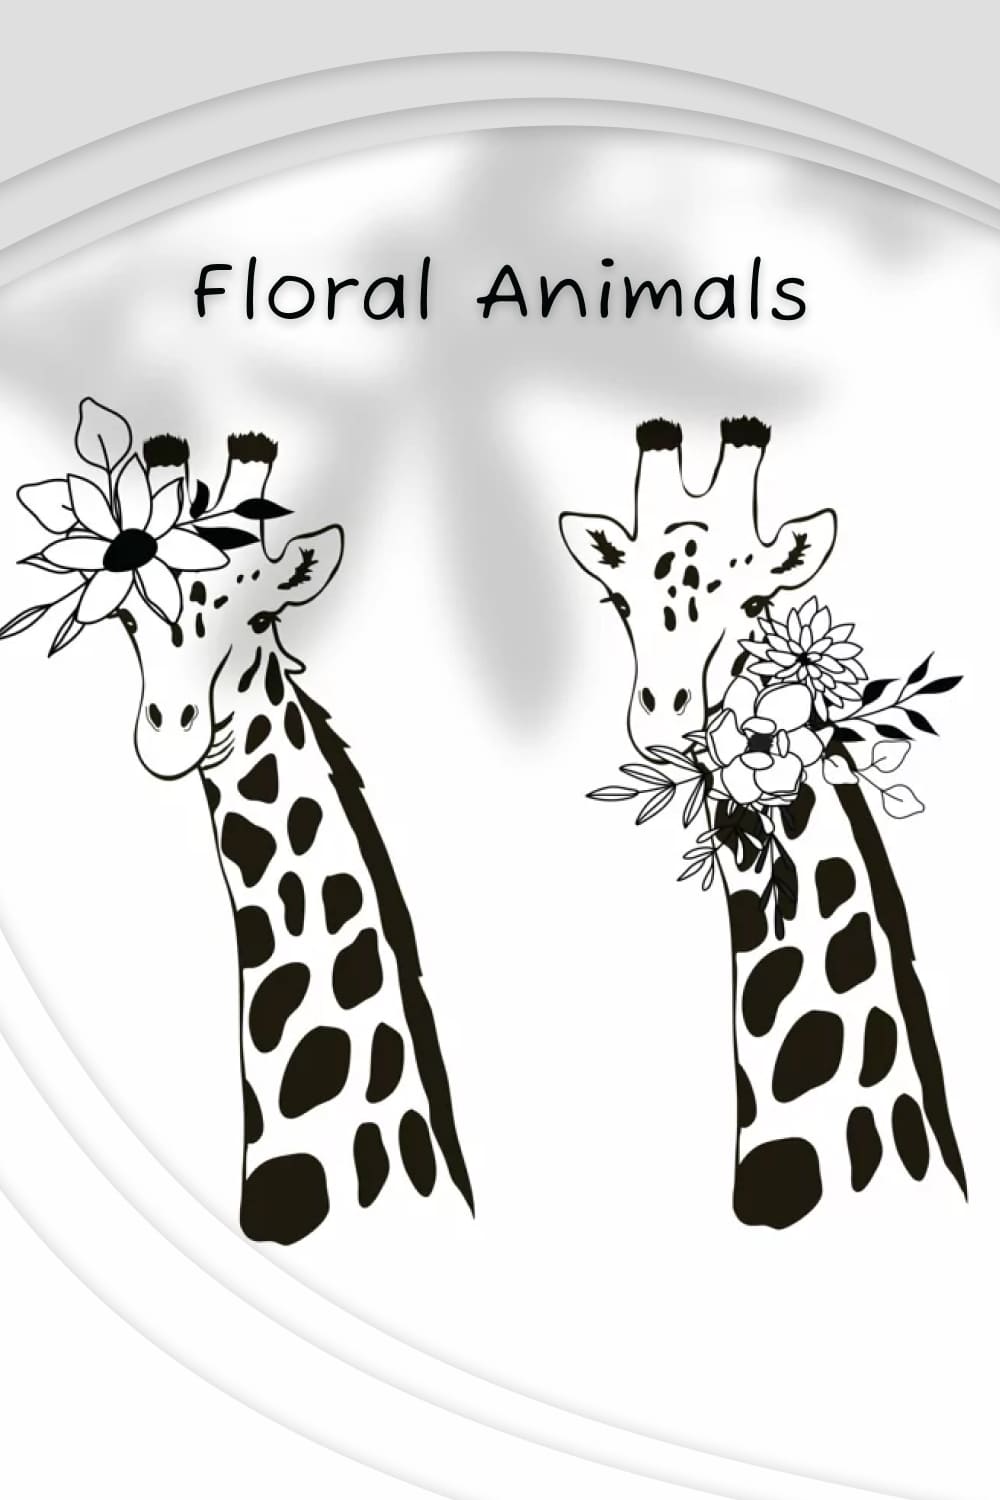 Picture of two giraffes with flowers on their heads.